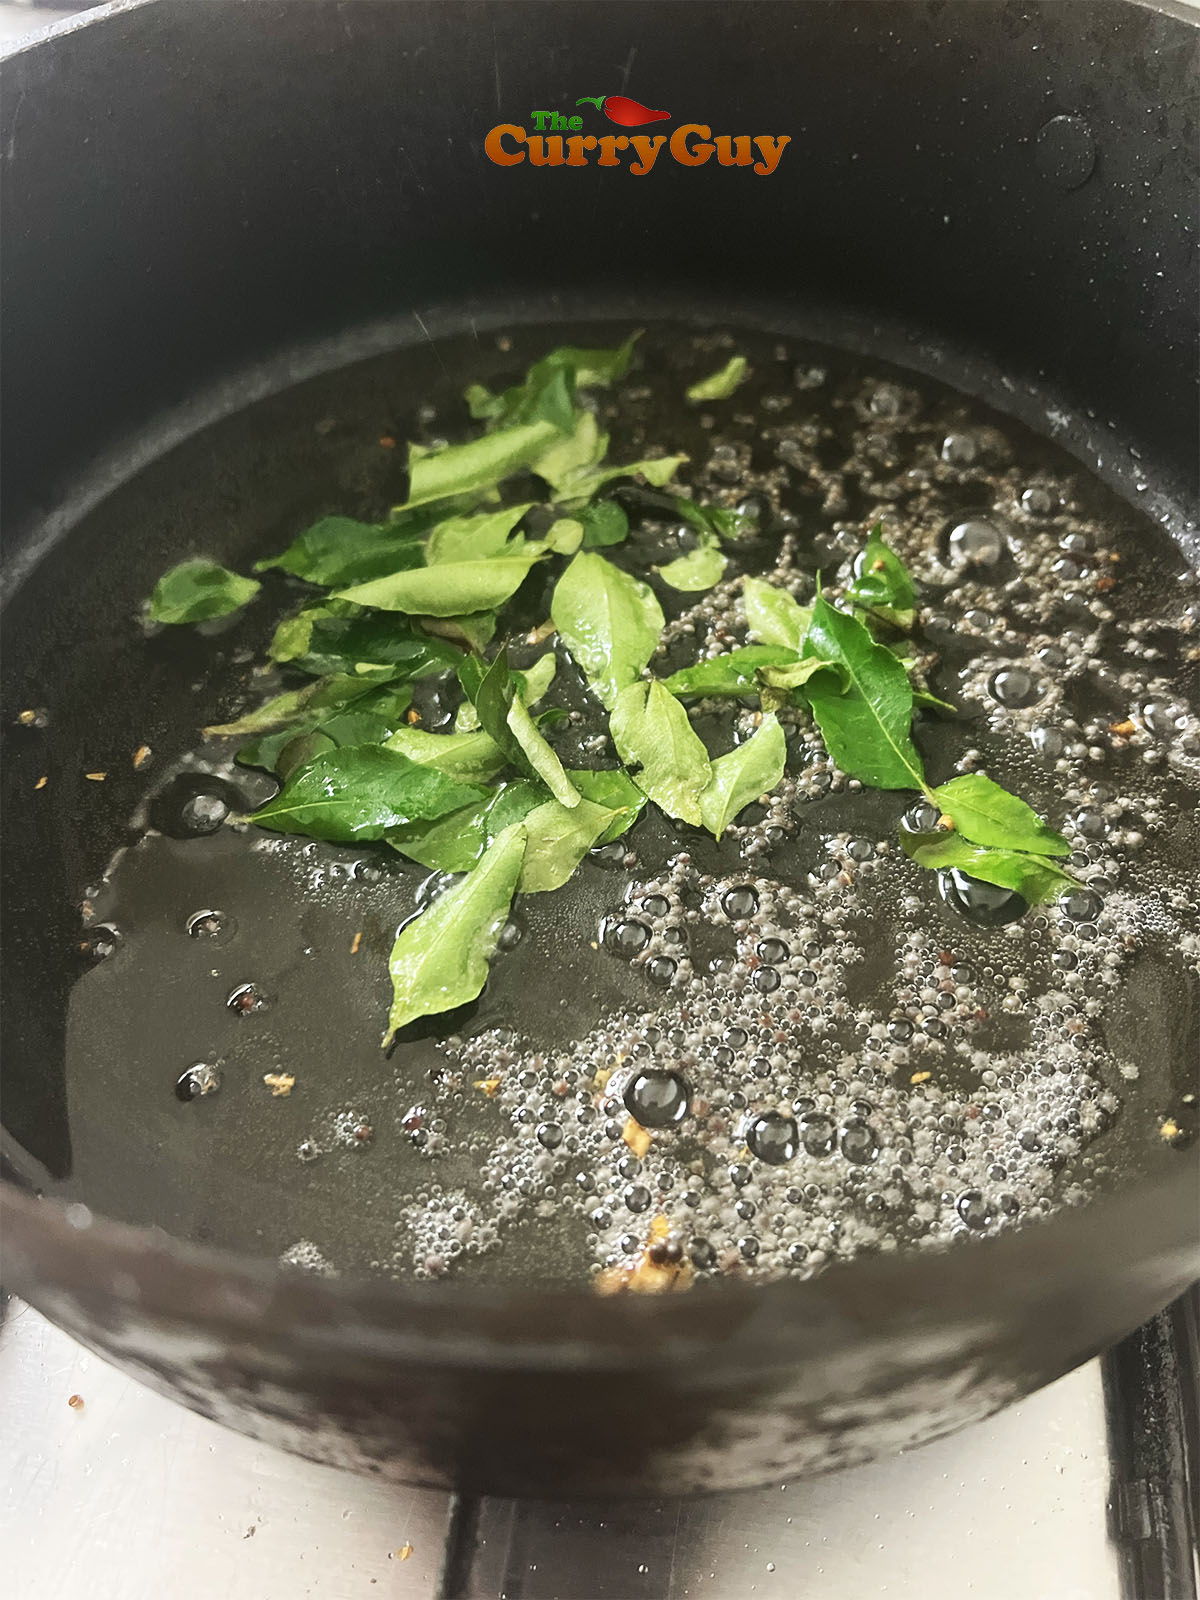 Frying mustard seeds and curry leaves in oil.